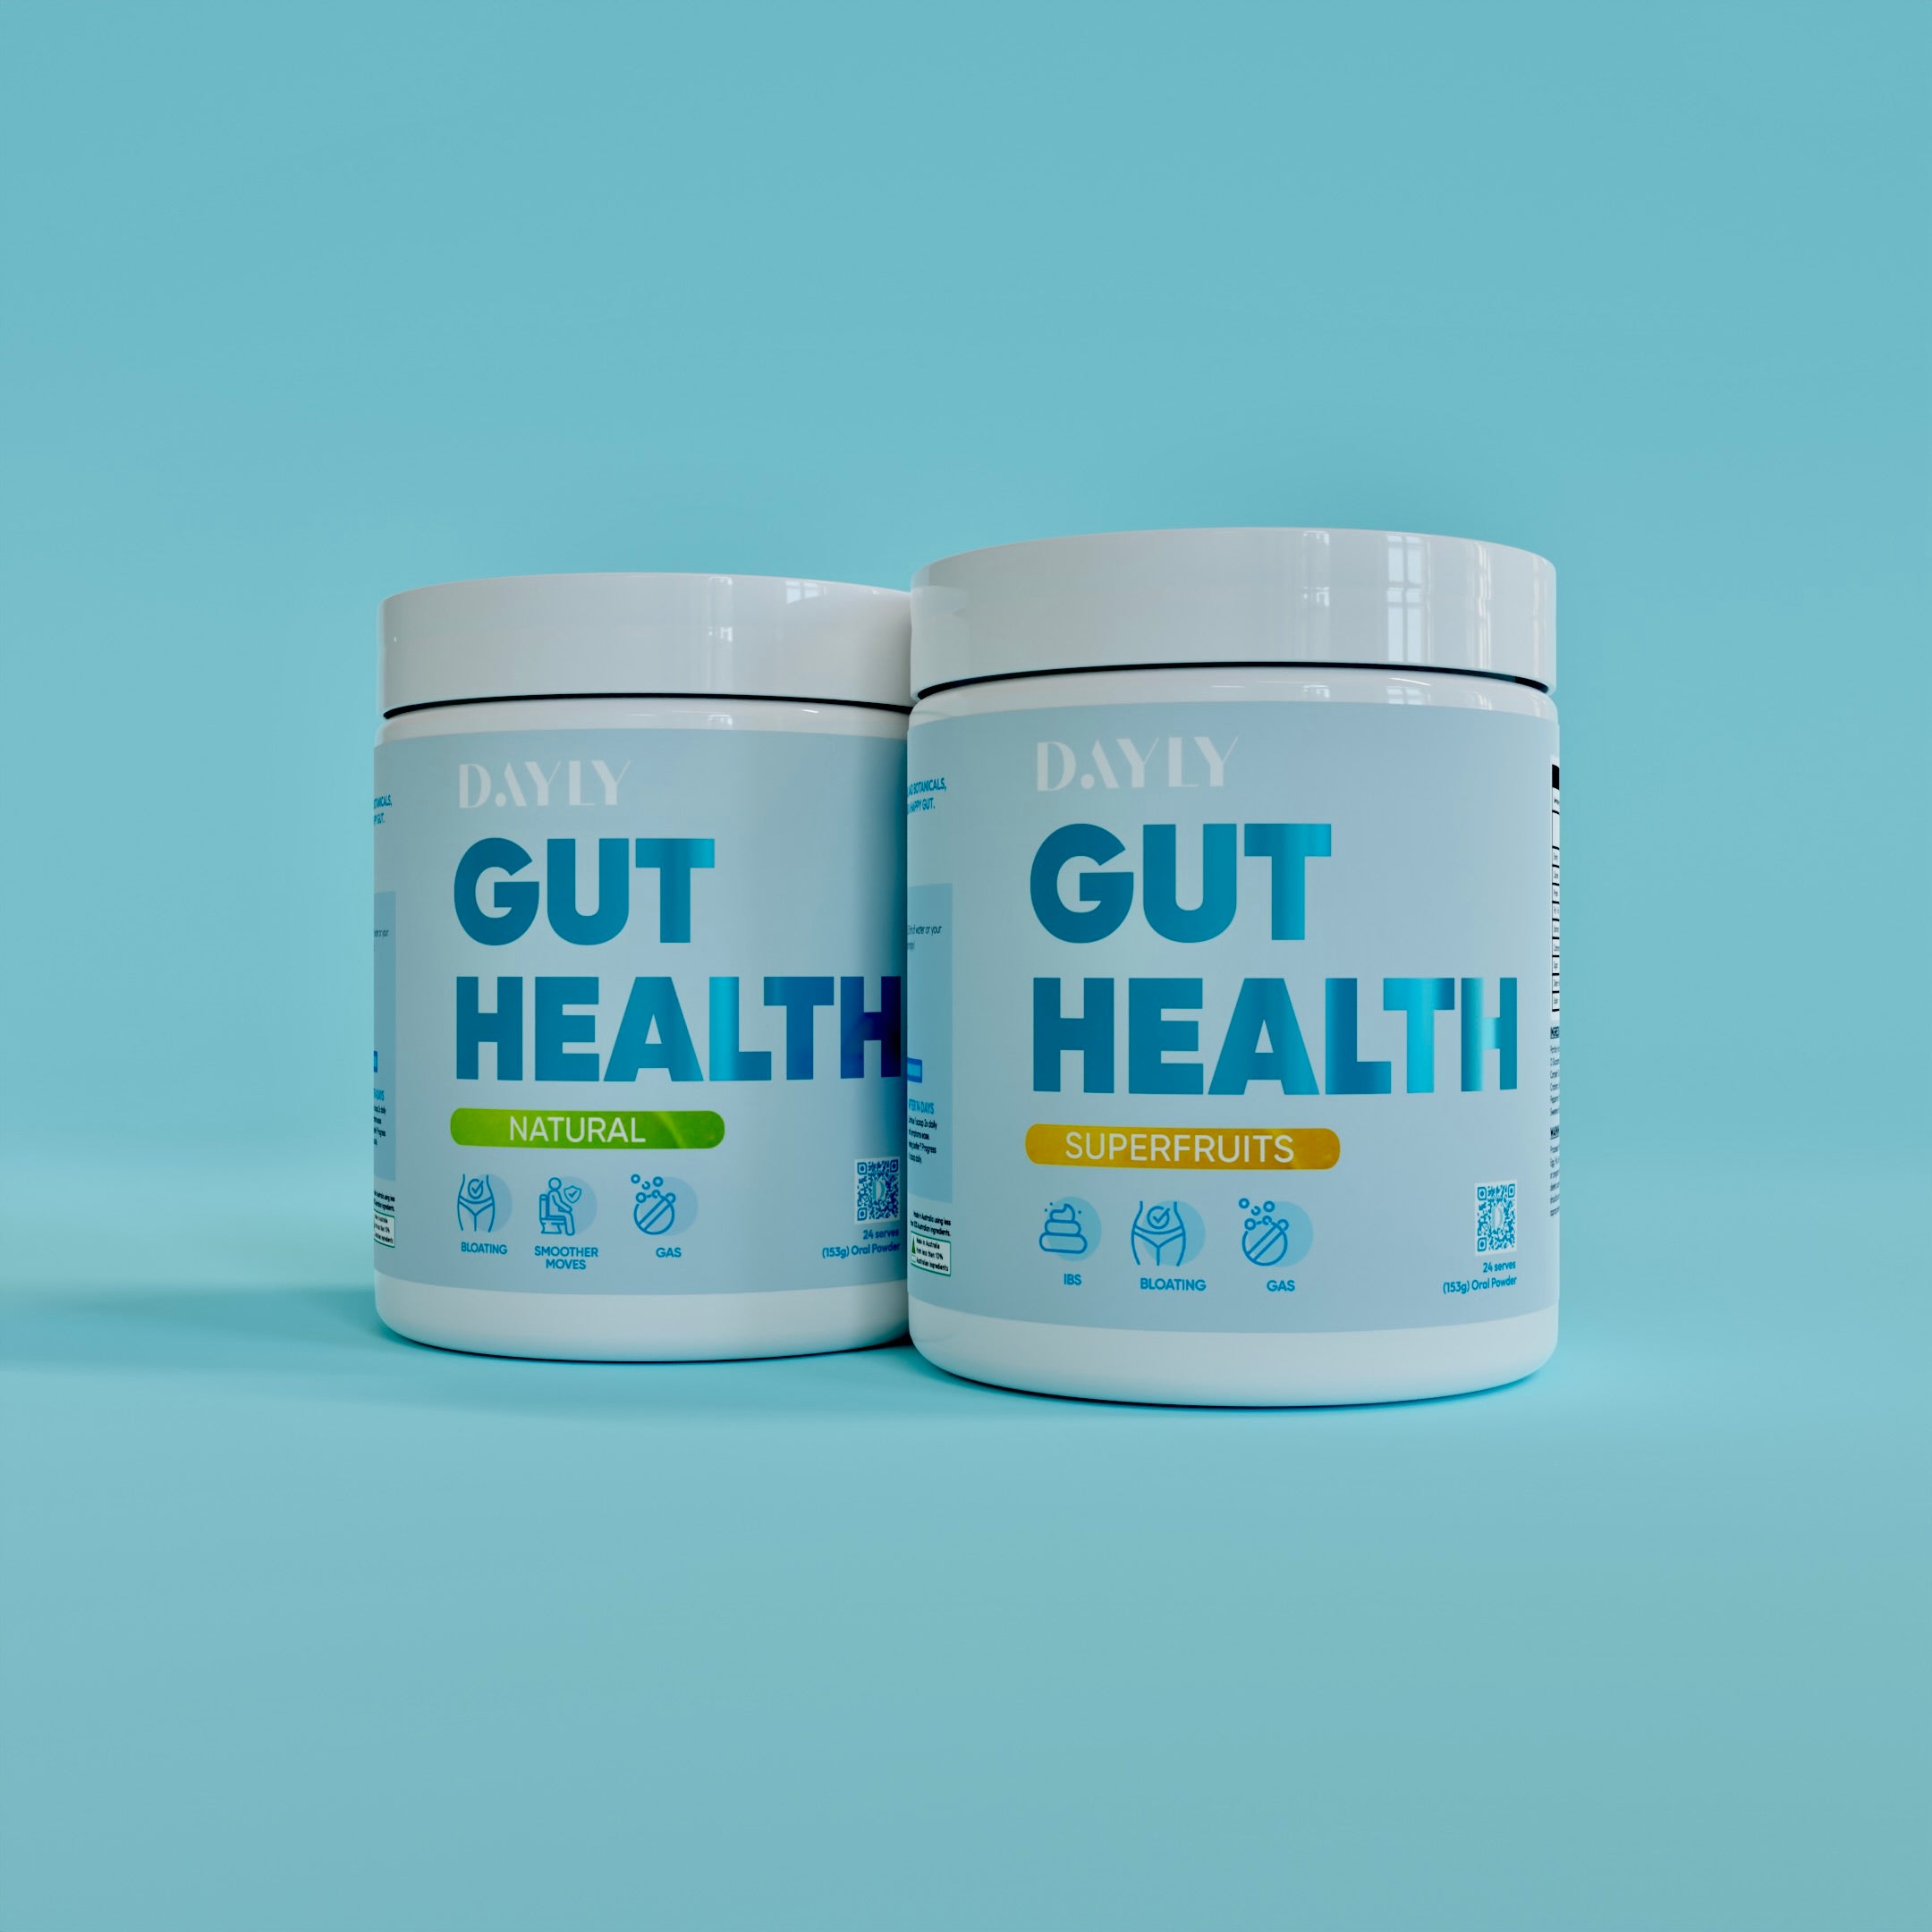 DAYLY Gut Health Natural & Superfruits